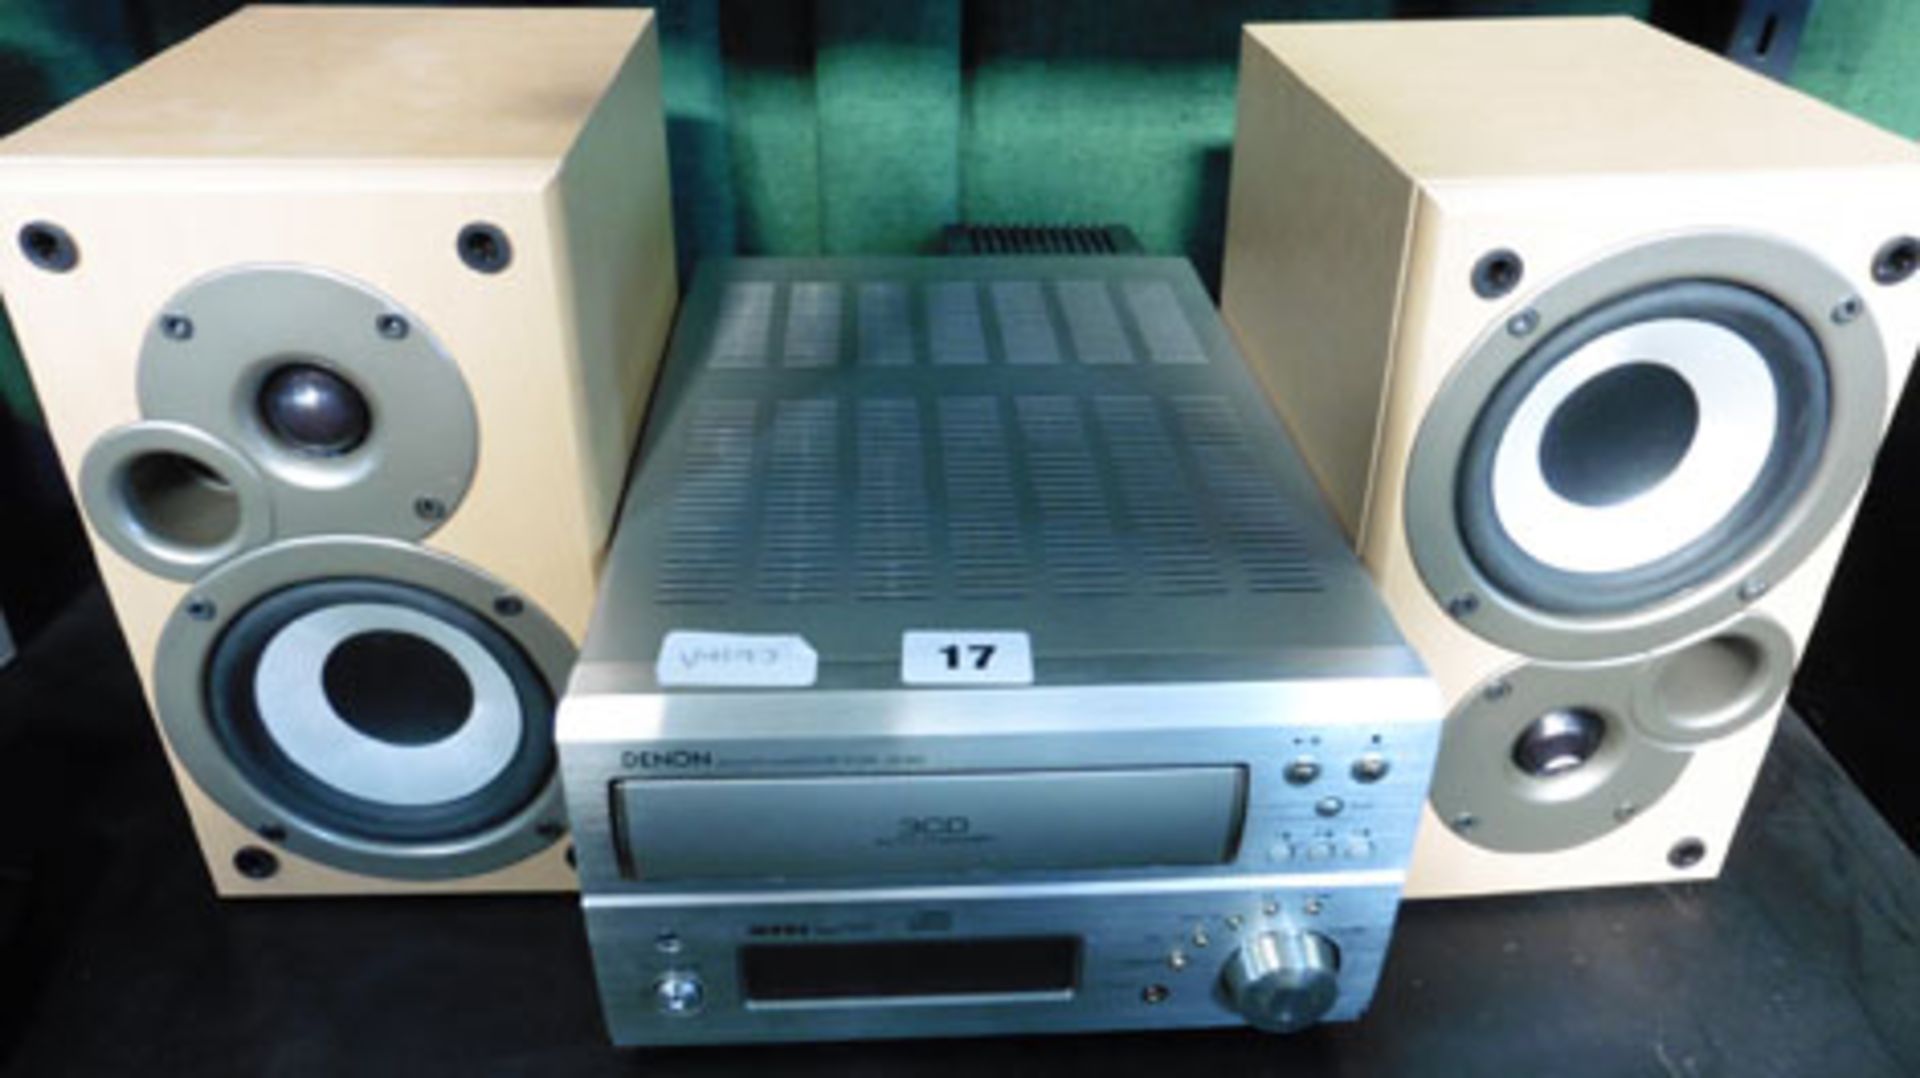 Denon CD micro system with 3 CD changer and speakers *VAT will not be added to the hammer price of